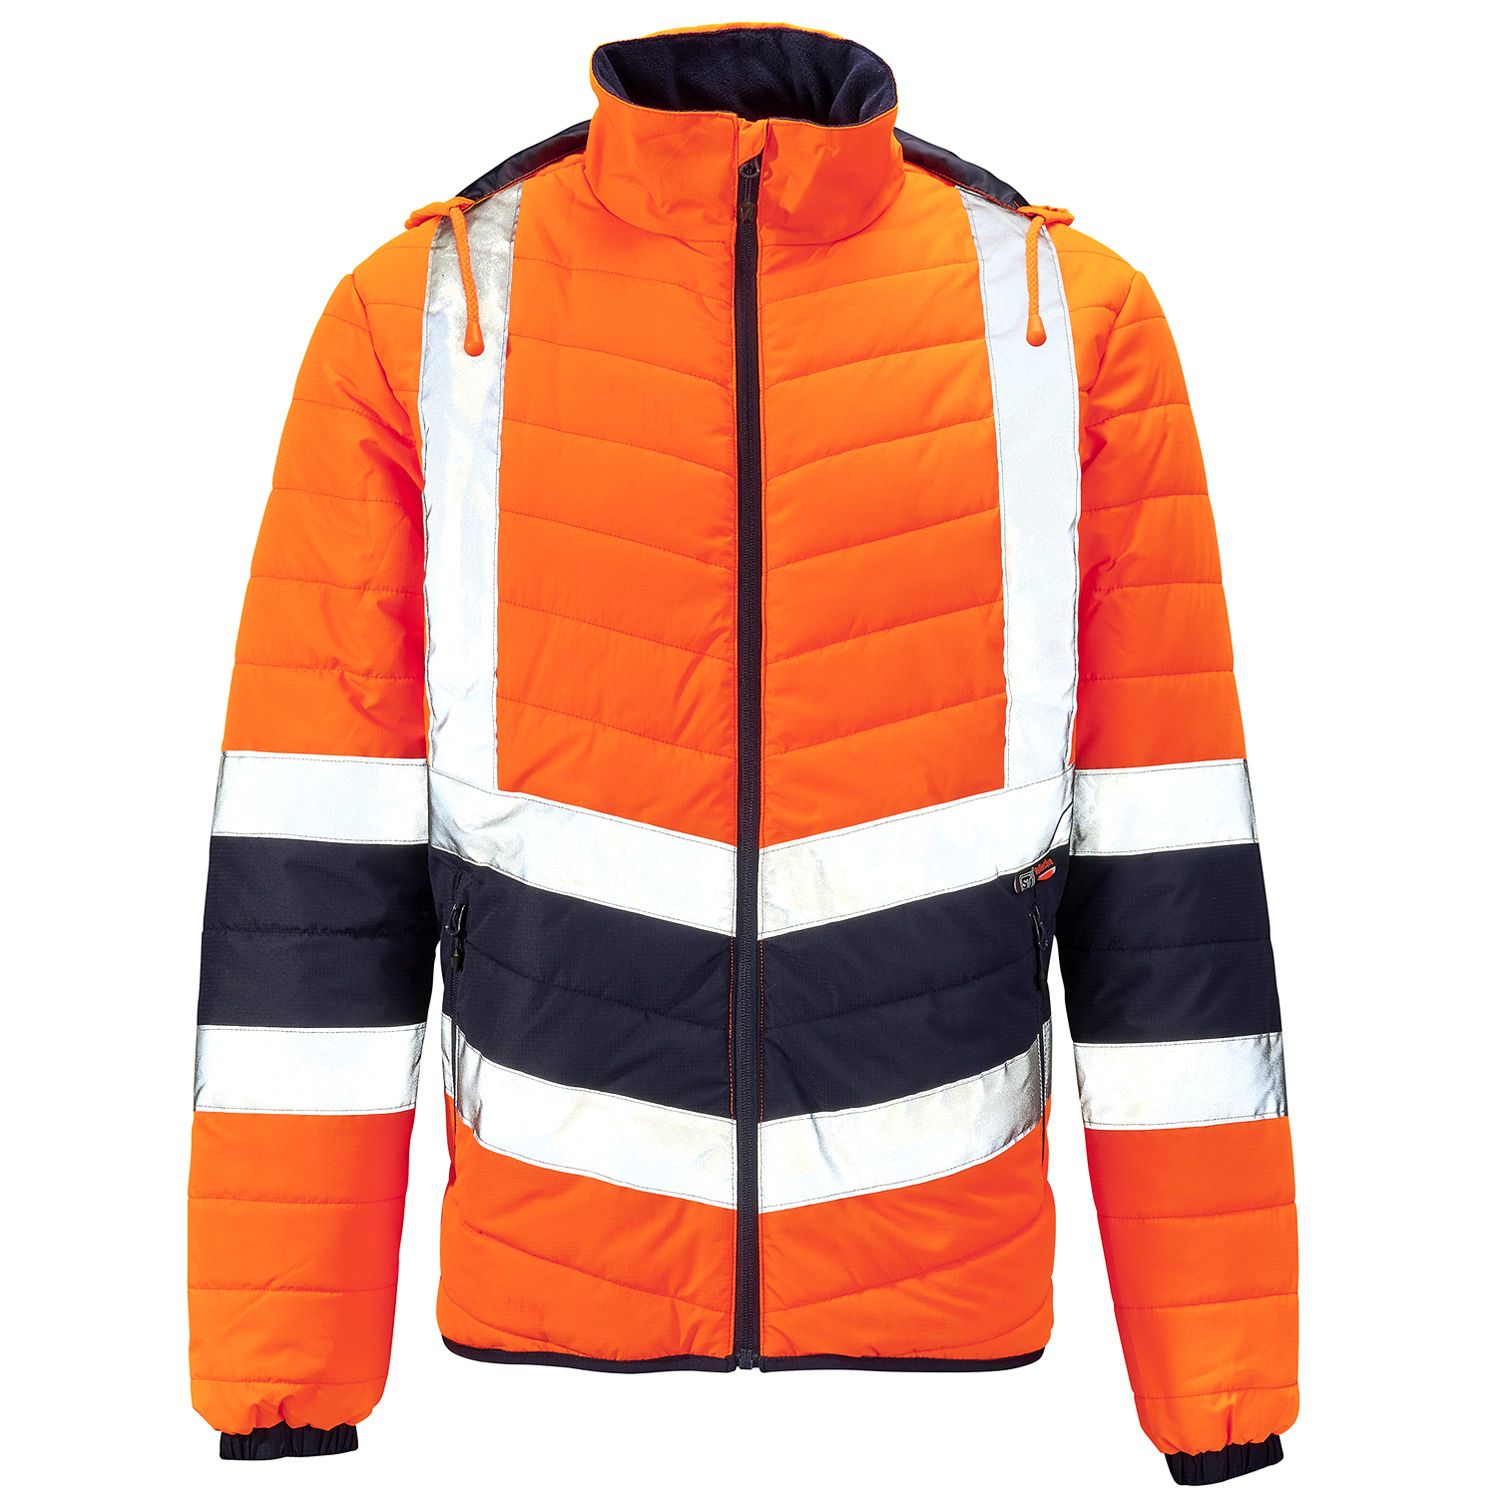 SUPERTOUCH Hi Vis Orange 2 Tone Puffer Jacket | Welding and Safety ...